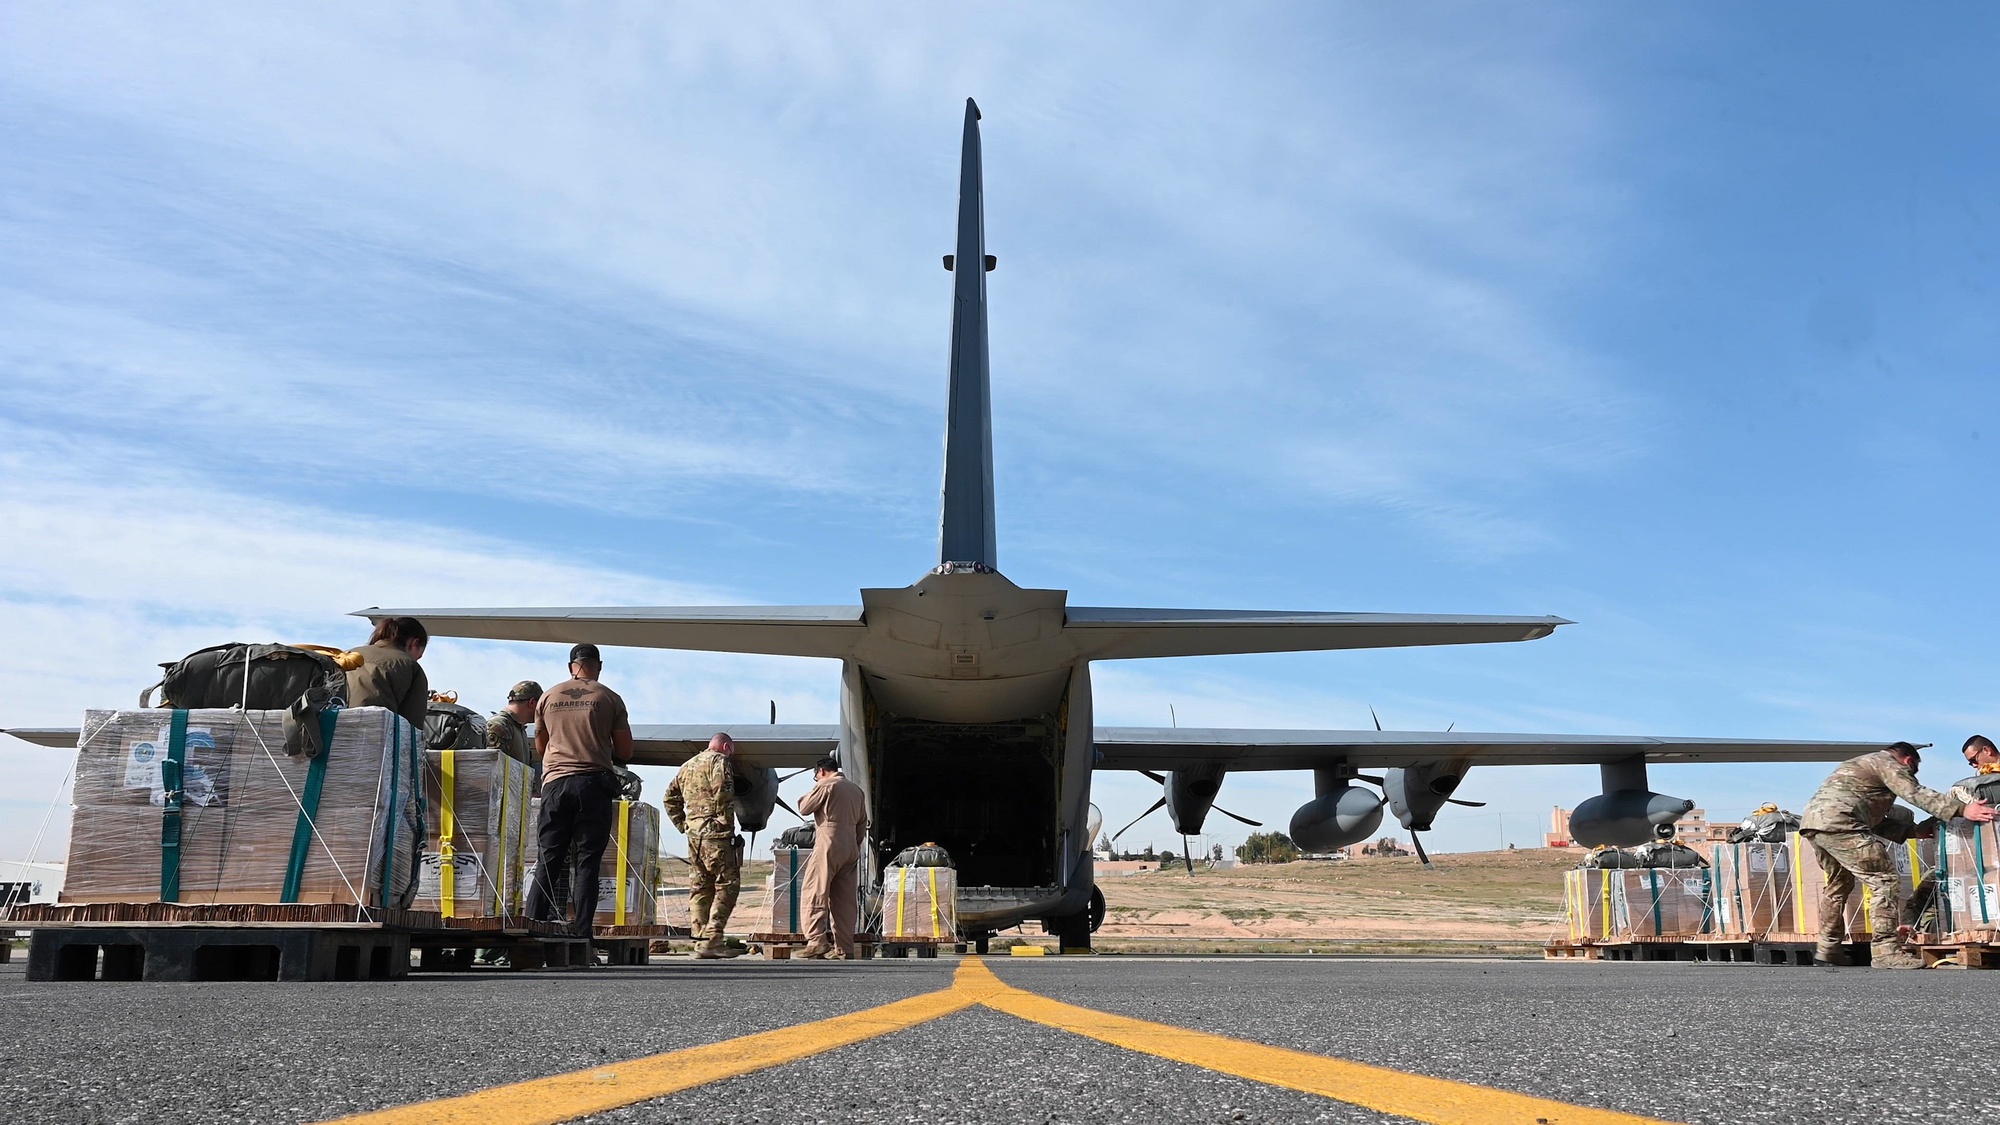 Pallets of aid sit on a runway with airmen nearby while an aircraft's back is open to load.